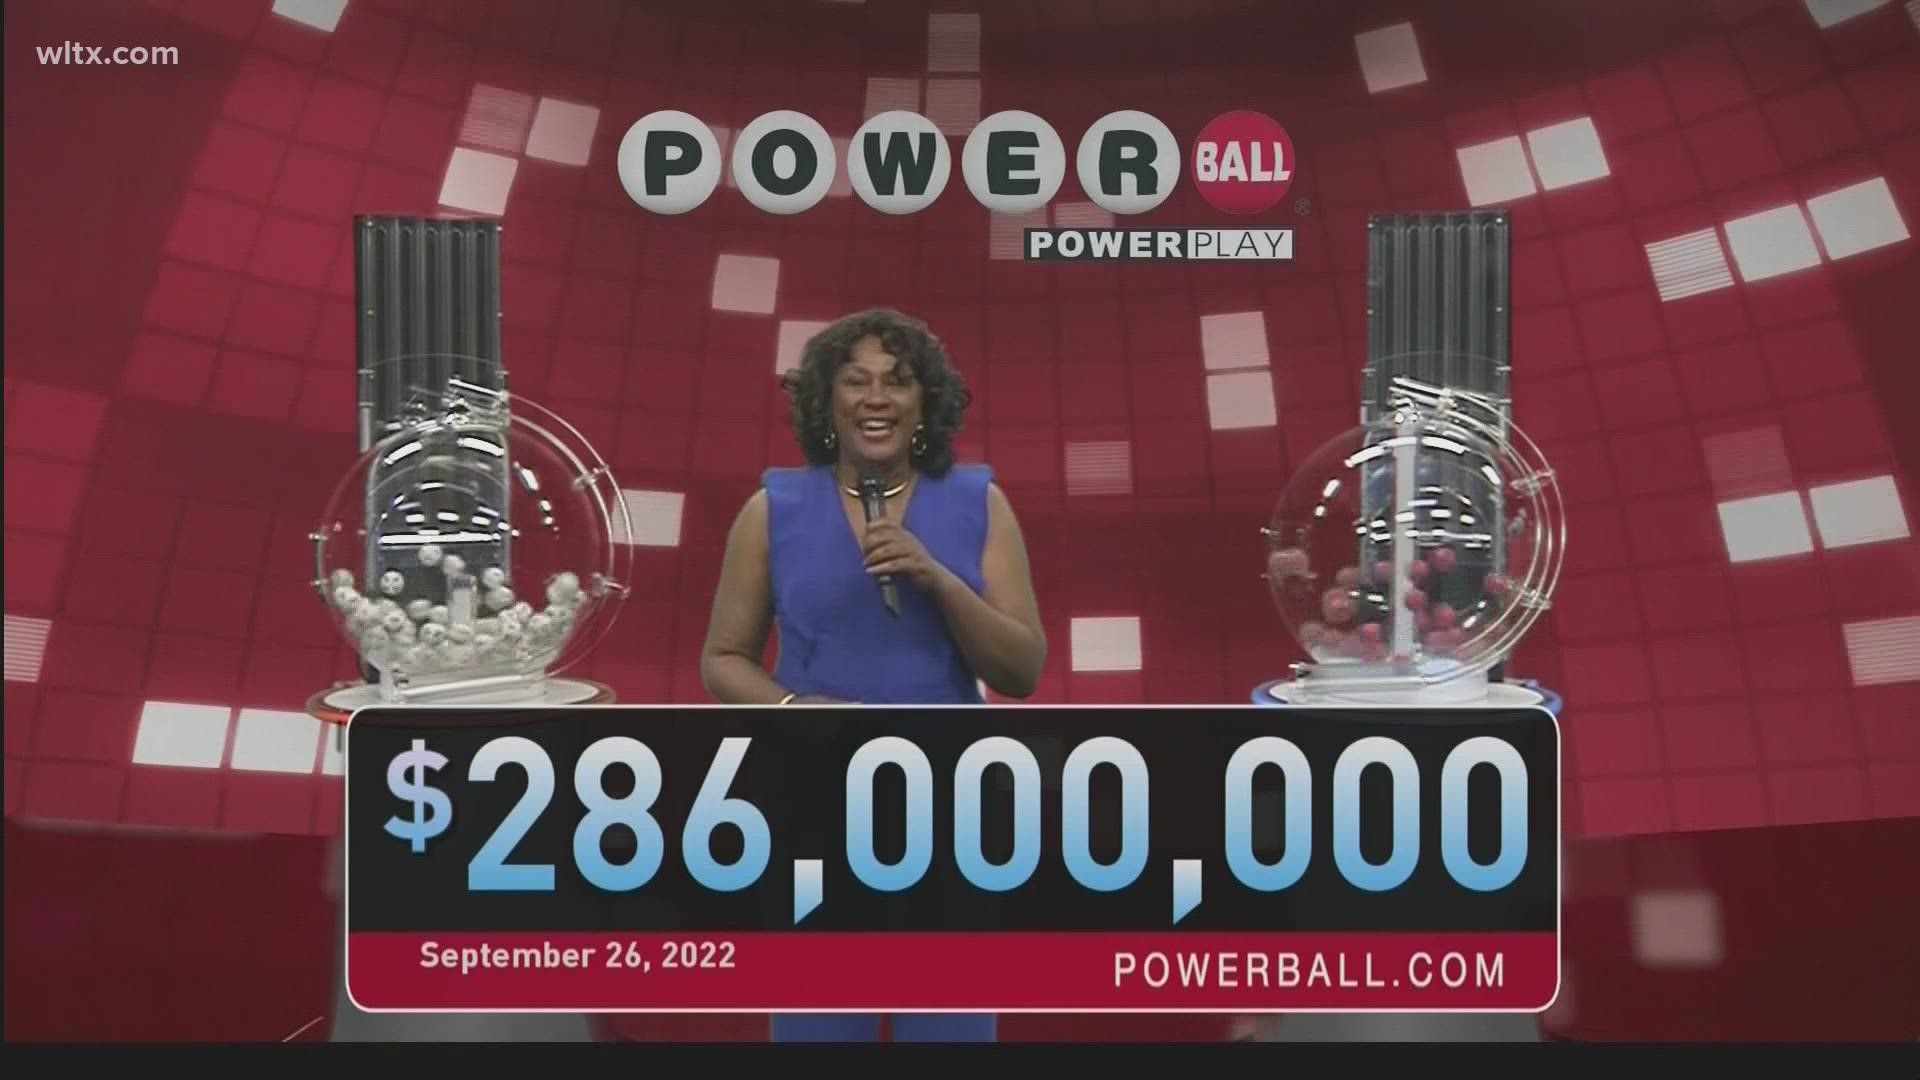 Here are the winning Powerball numbers for Monday, September 26, 2022.